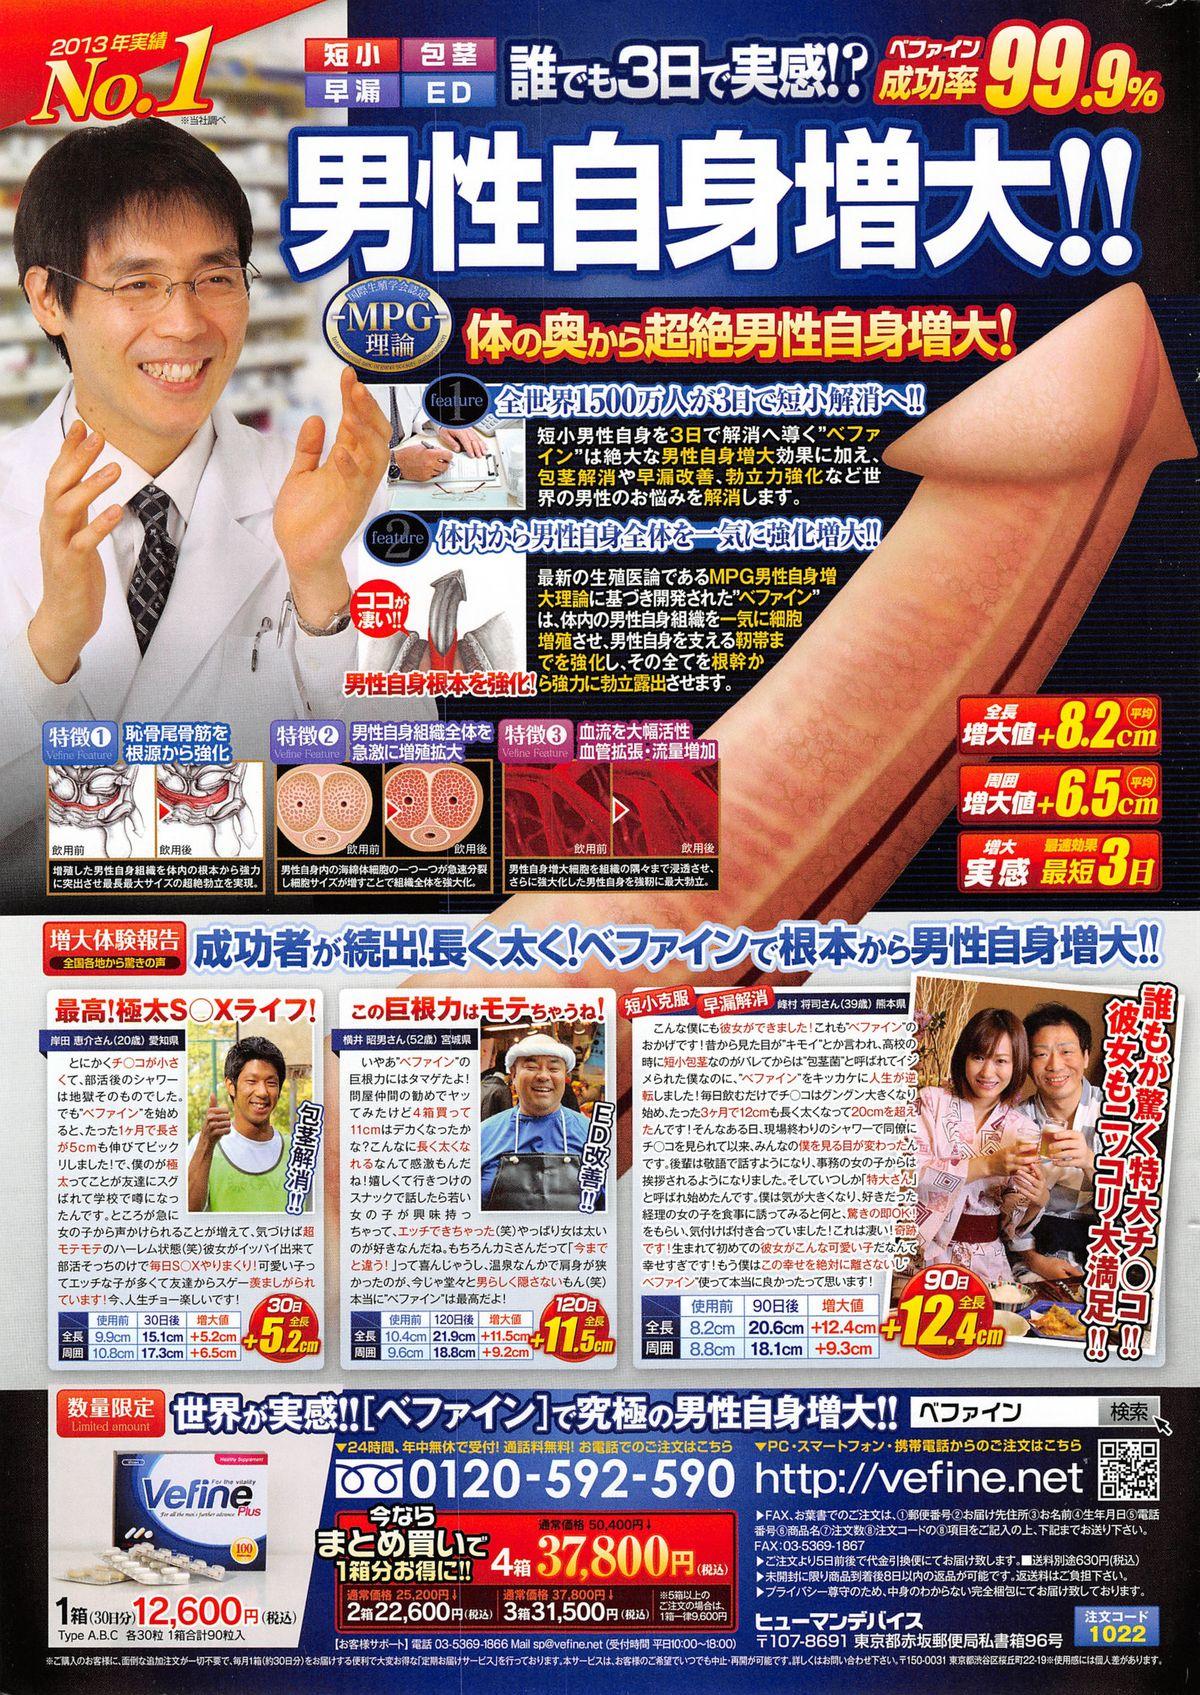 Cunnilingus Action Pizazz DX 2015-01 Club - Page 251